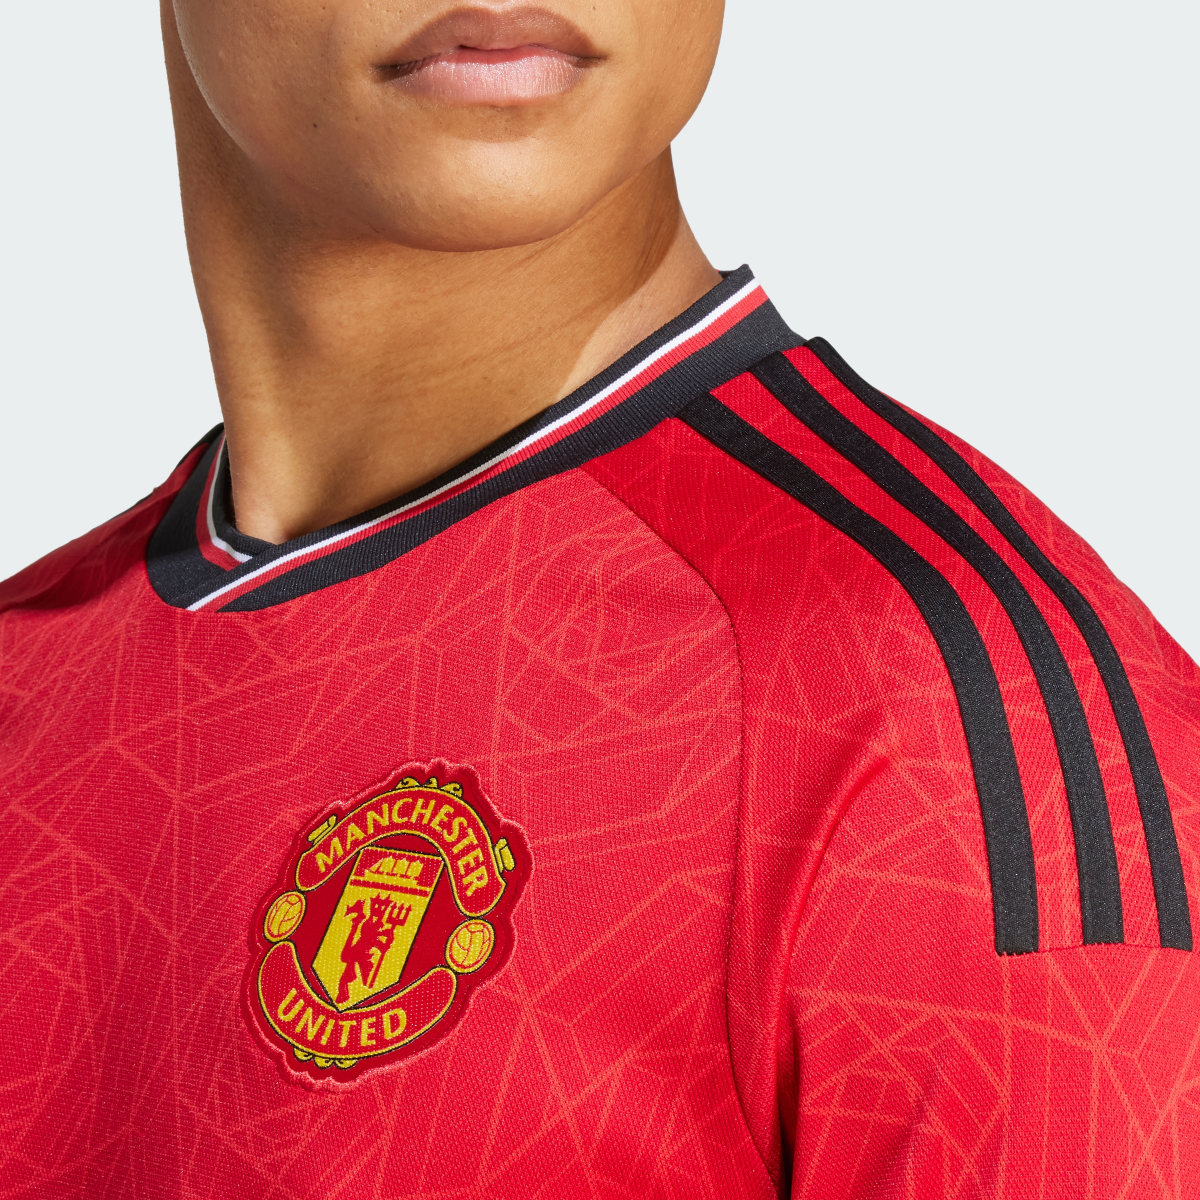 Adidas Maillot manches longues Domicile Manchester United 23/24. 7